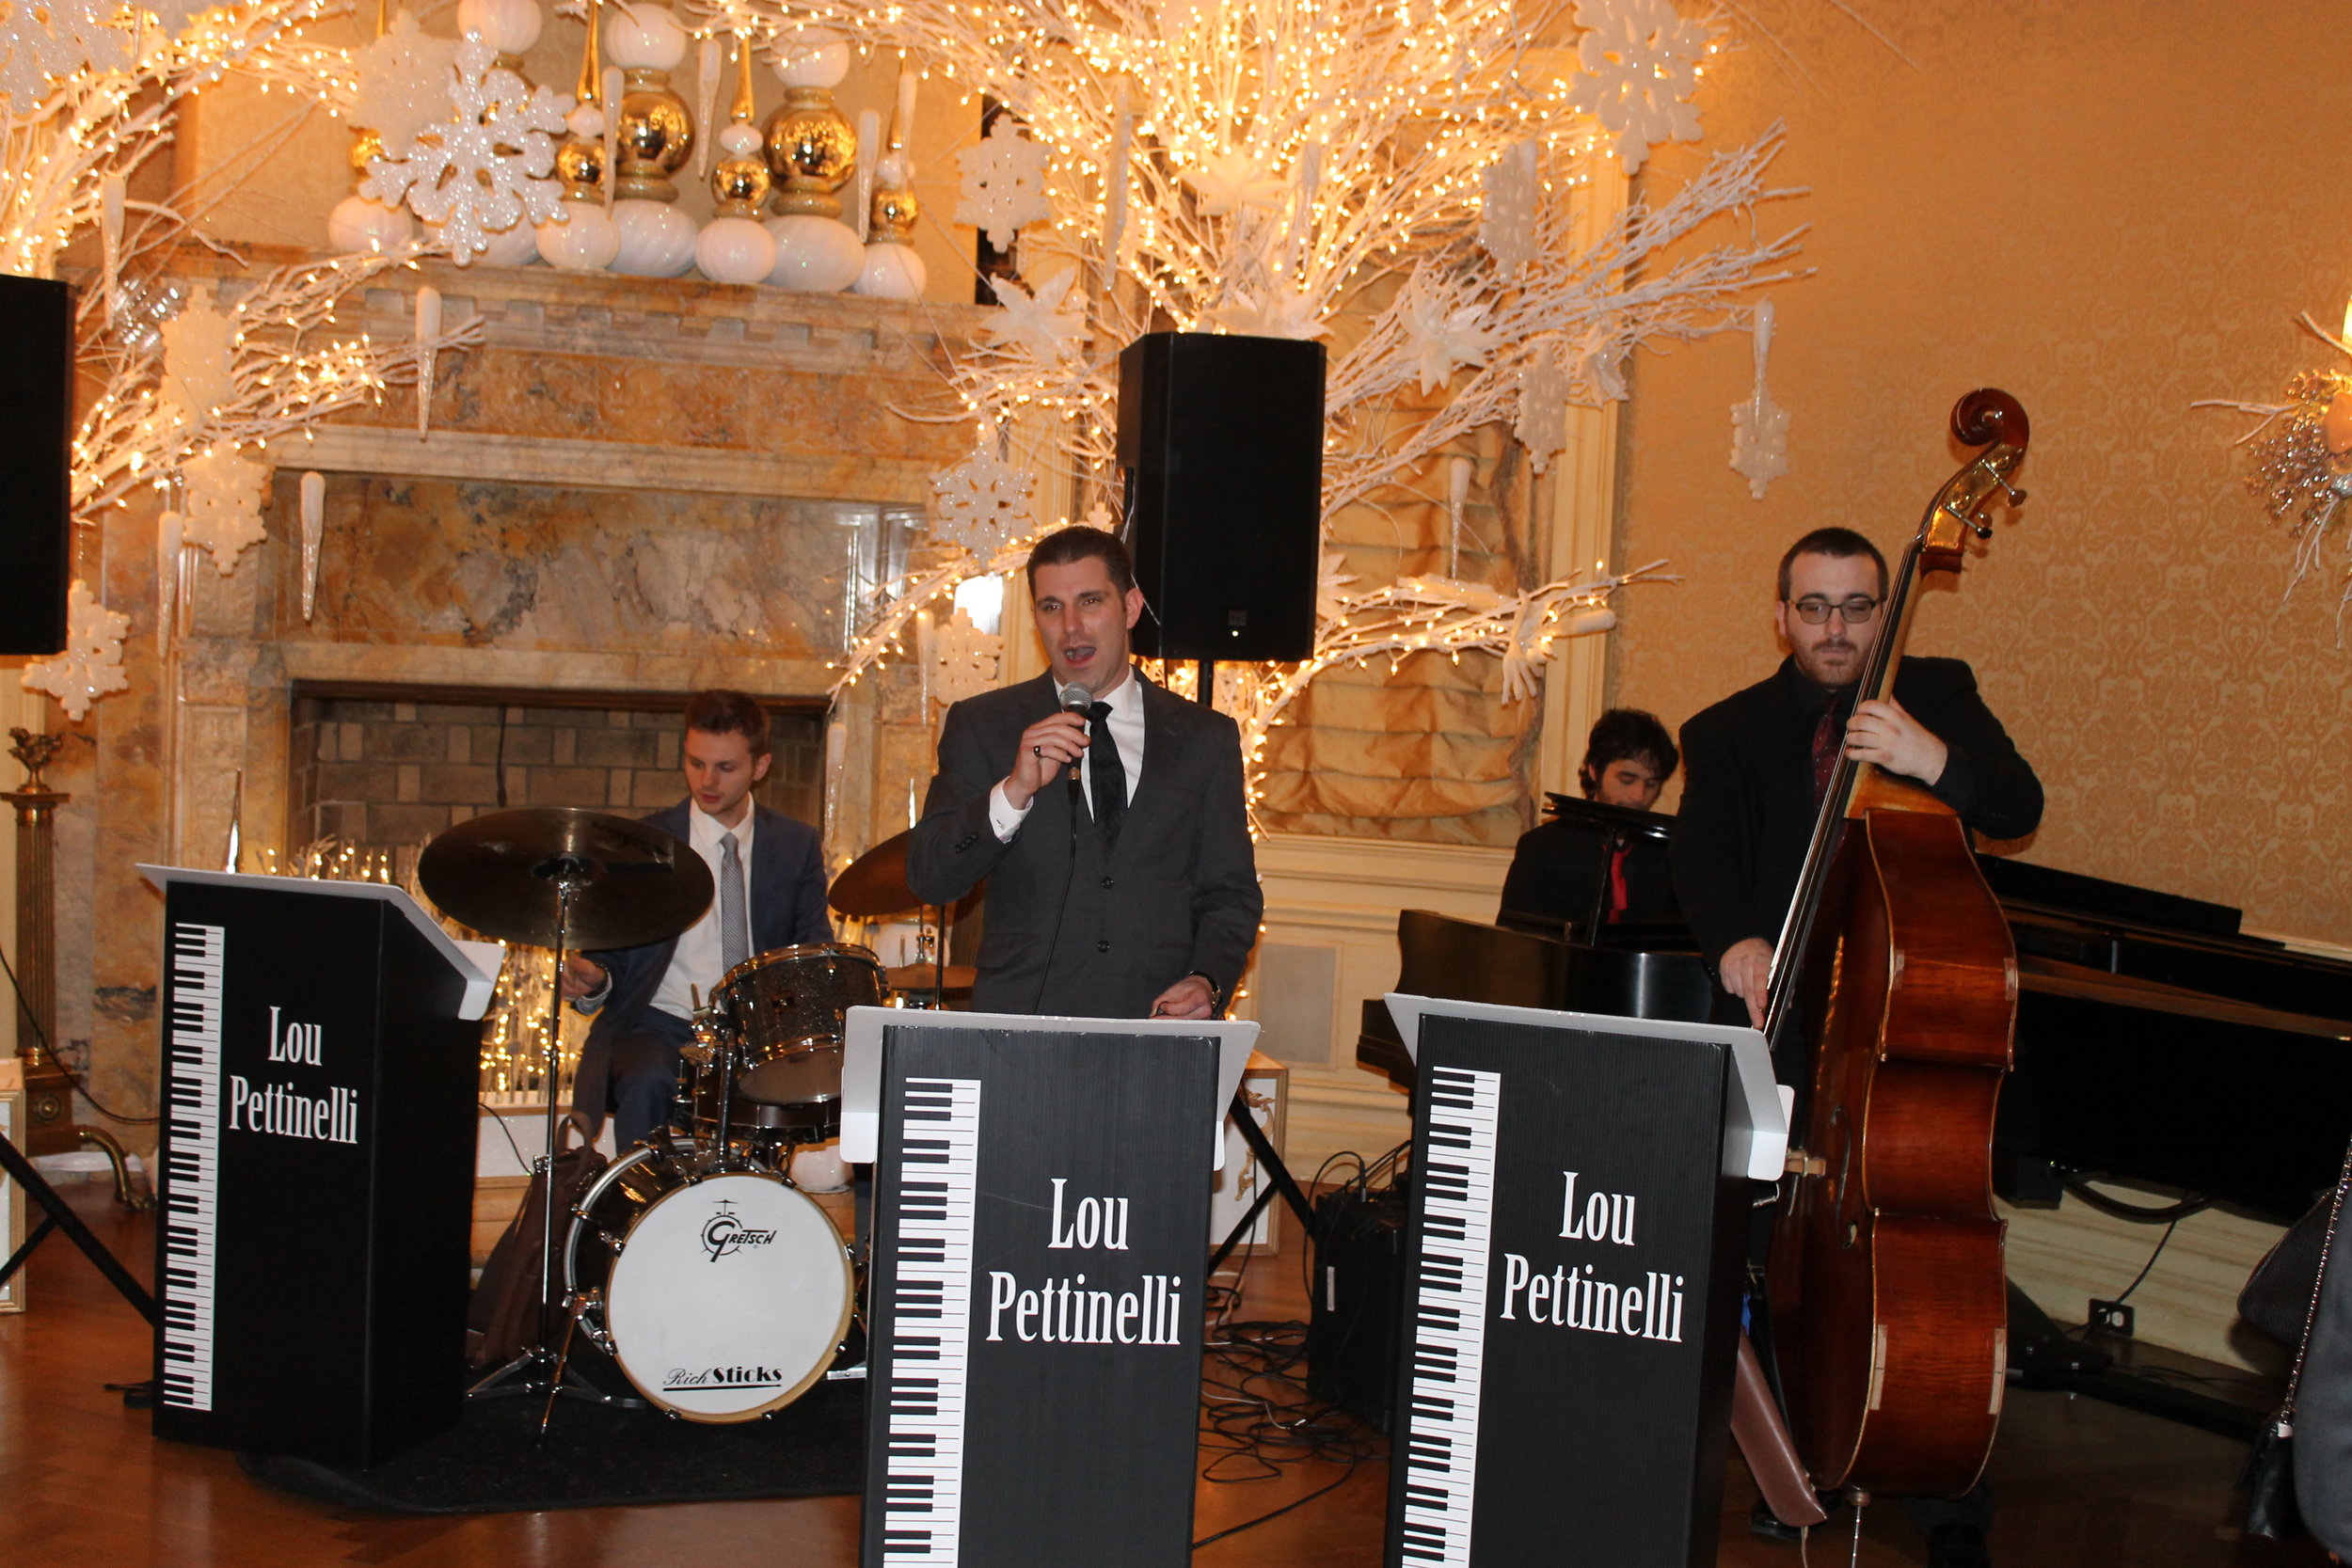 The Lou Pettinelli Band provided the entertainment for the evening.